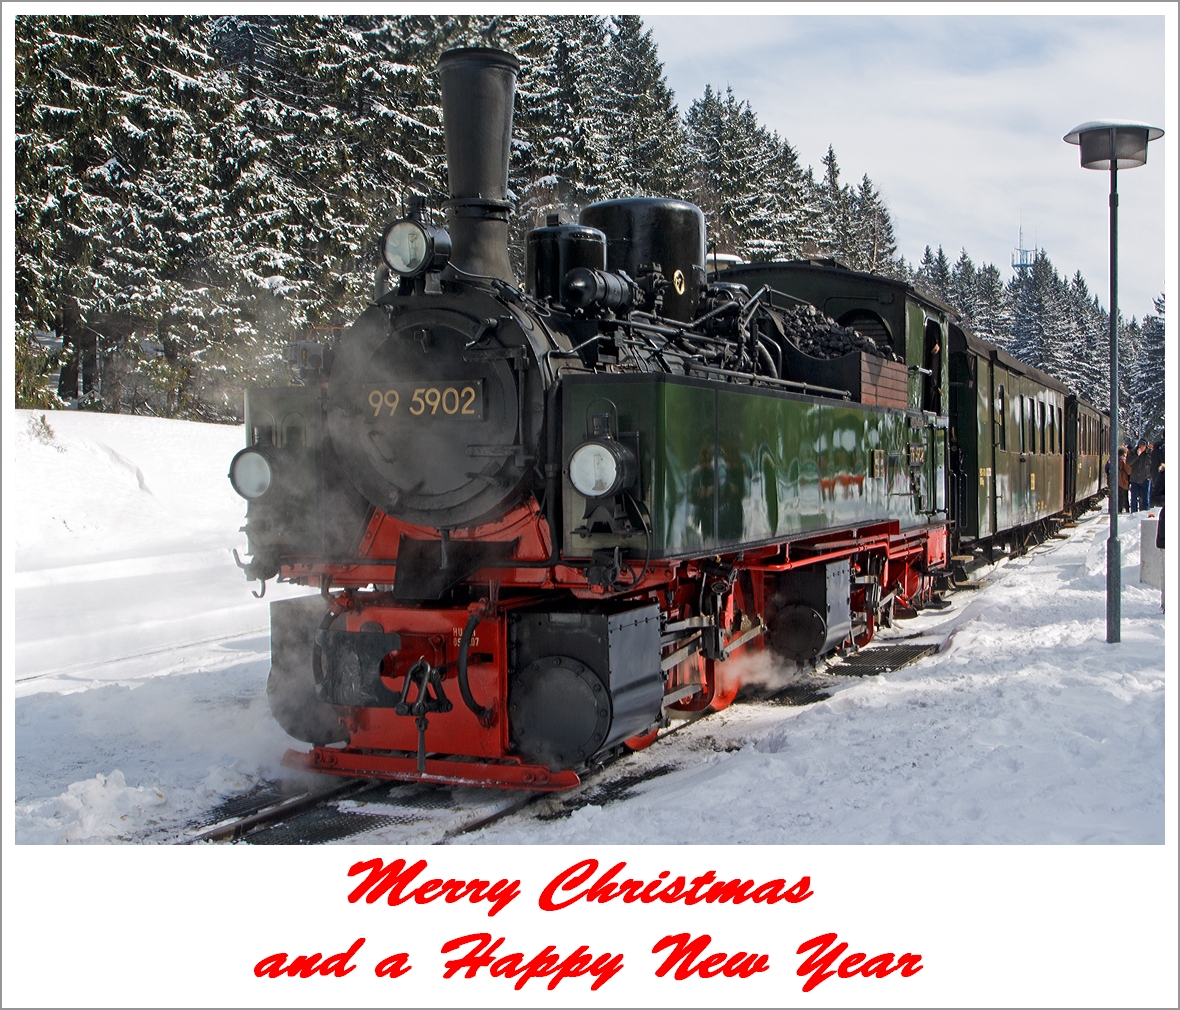 Merry Christmas and a Happy New Year  

I myself wish for peace all over the world!

The picture:
The Jung-Malletlok 99 5902 on 23.03.2013 at the stop in in the station of Schierke.
The locomotive was built ad 1898 by Arnold Jung Locomotive Factory in Jungenthal at Kirchen/Sieg under the serial number 261.